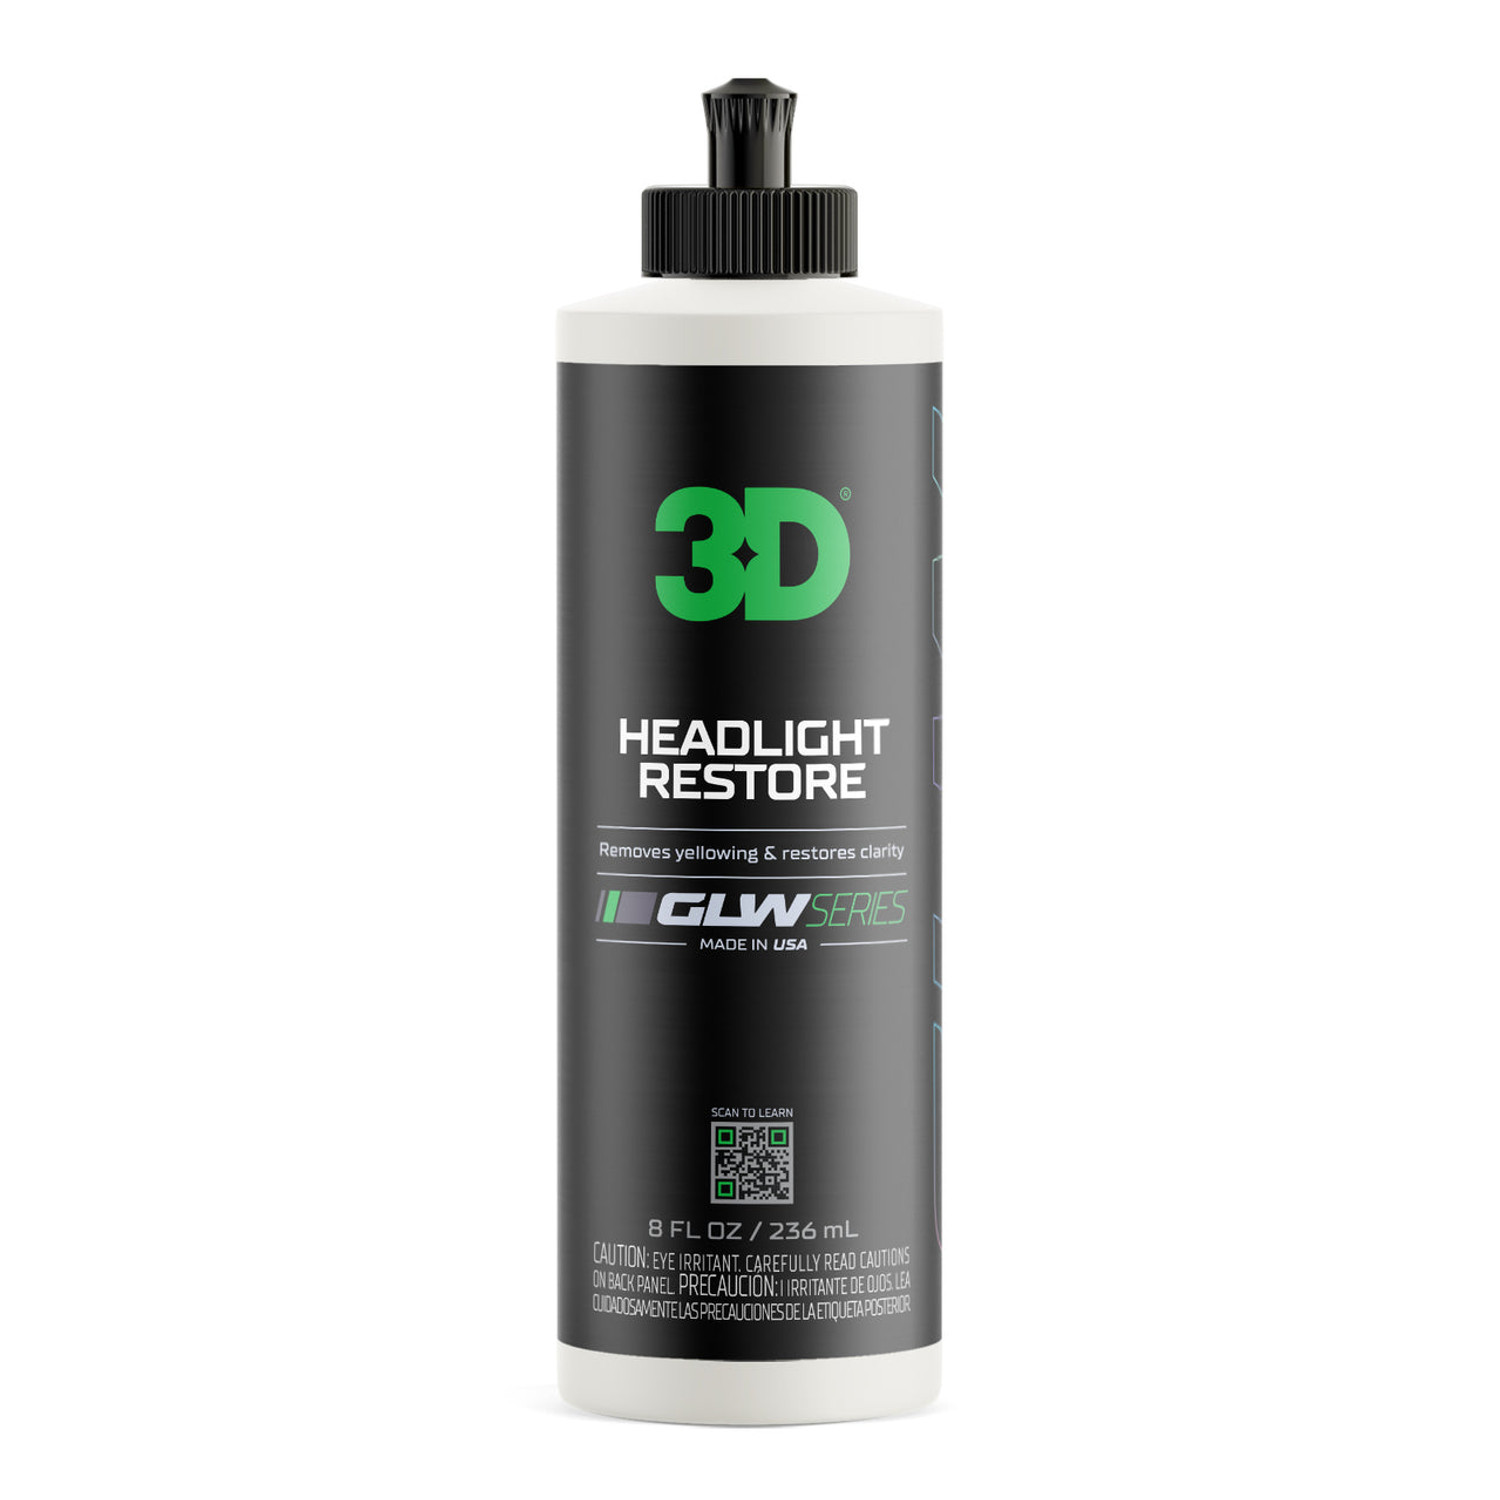 Chemical Guys Headlight Restorer Review: Does it really work